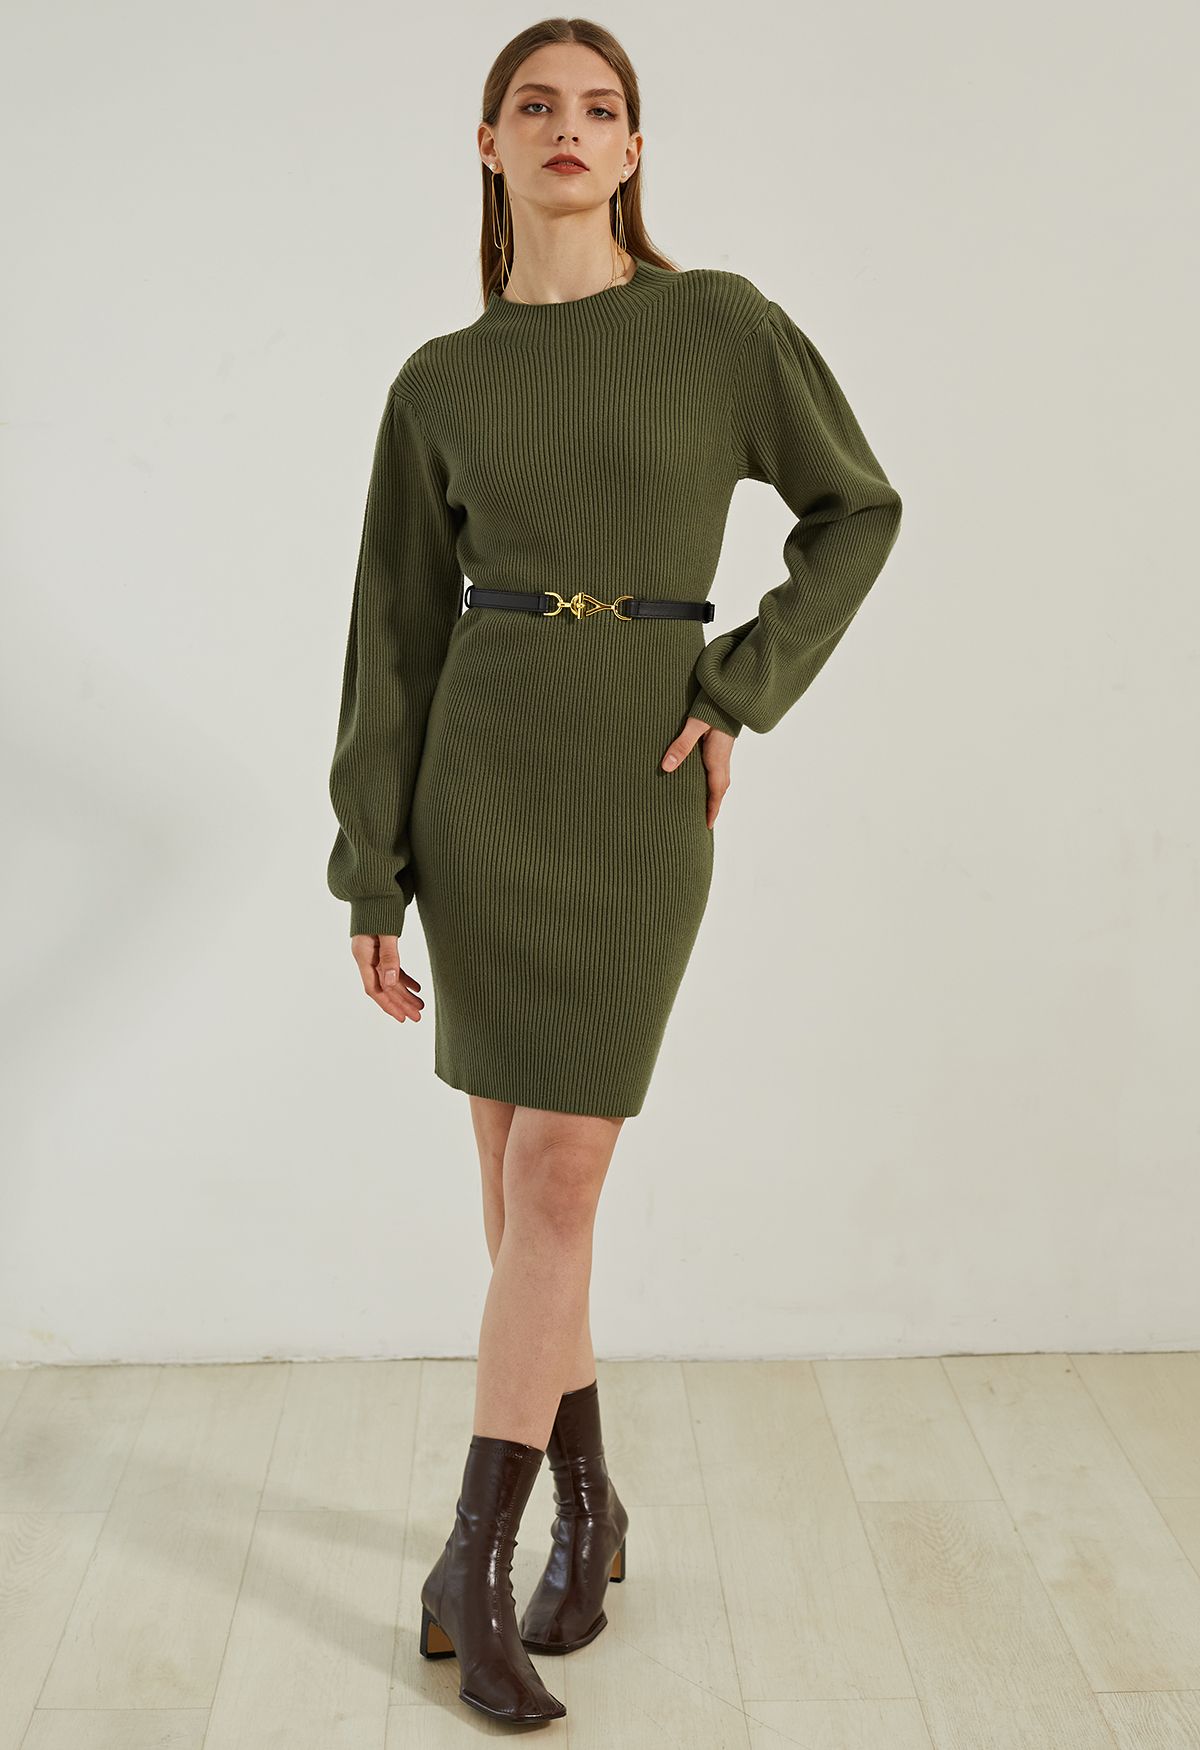 Lantern Sleeve Round Neck Ribbed Sweater Dress in Army Green